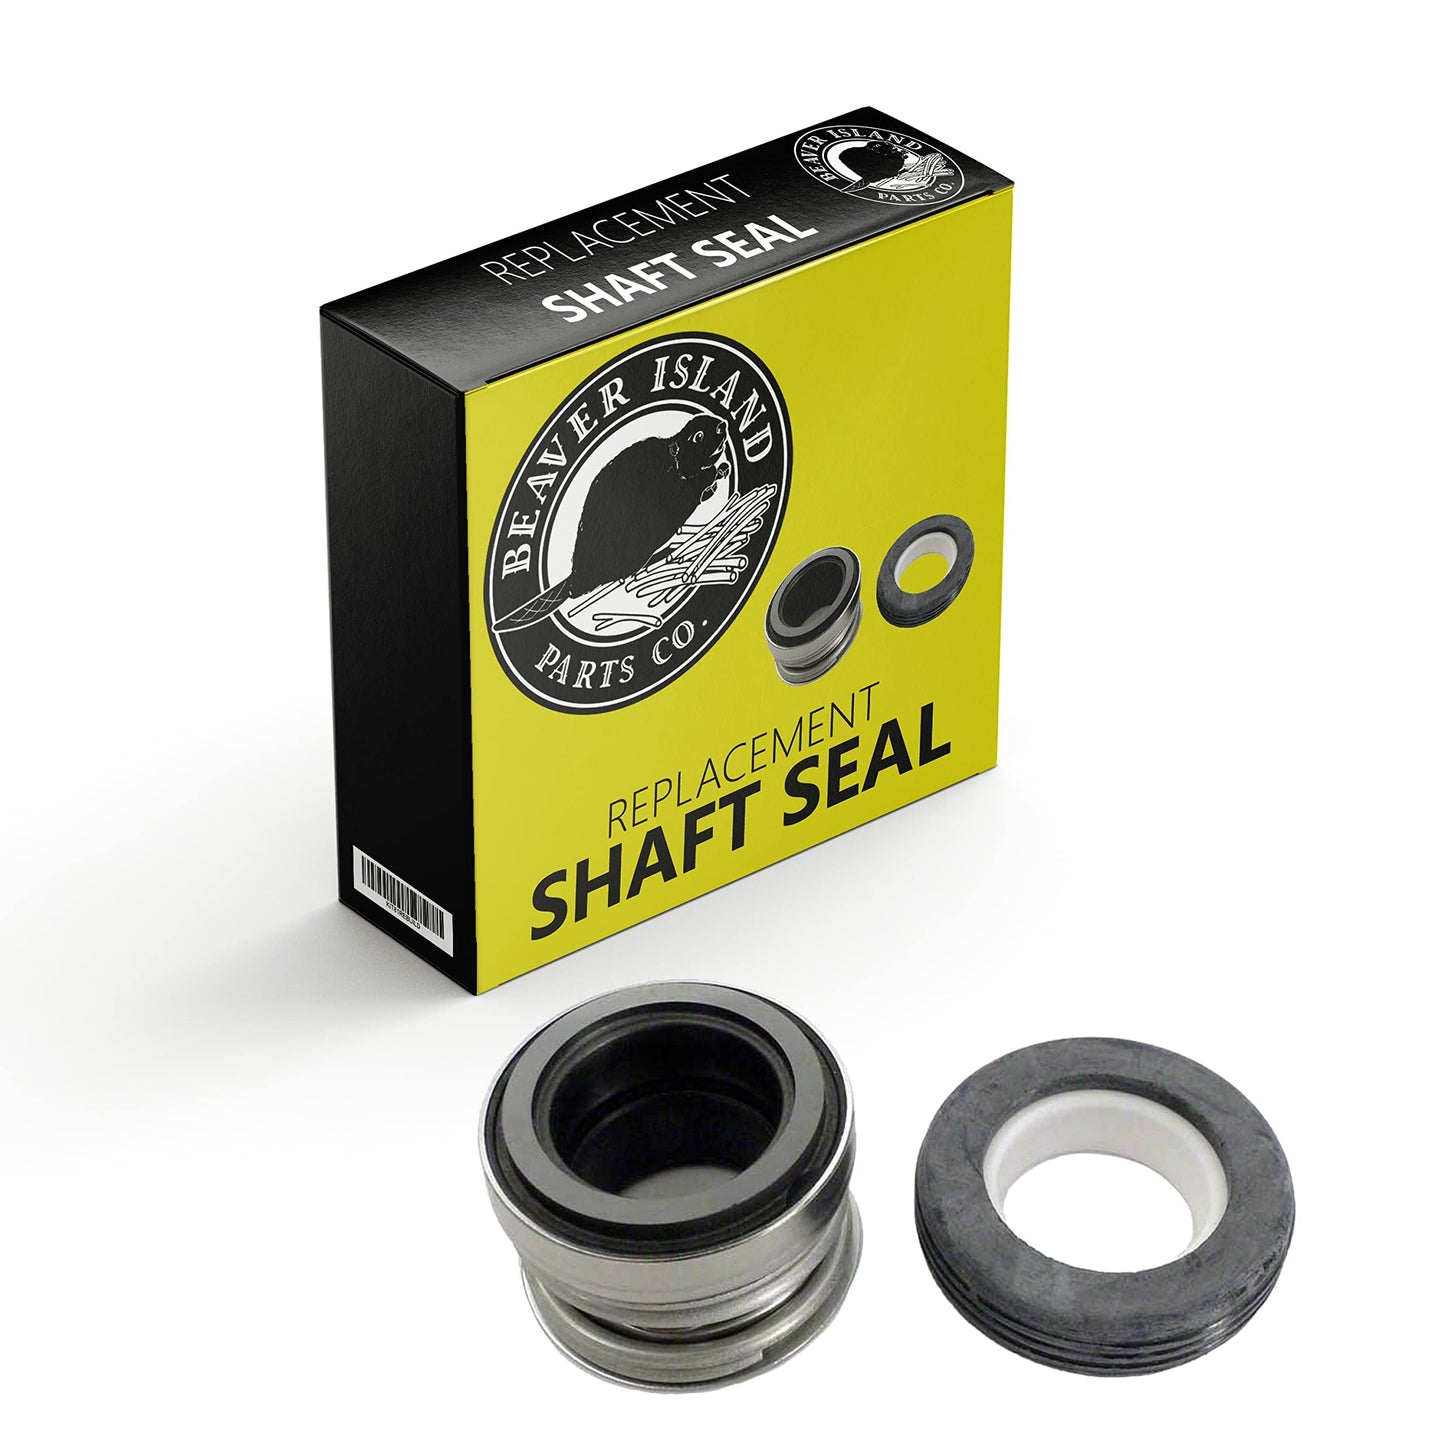 Shaft Seal Replacement for Premier 120T Series 31-812 Pump Motor Mechanical Seal